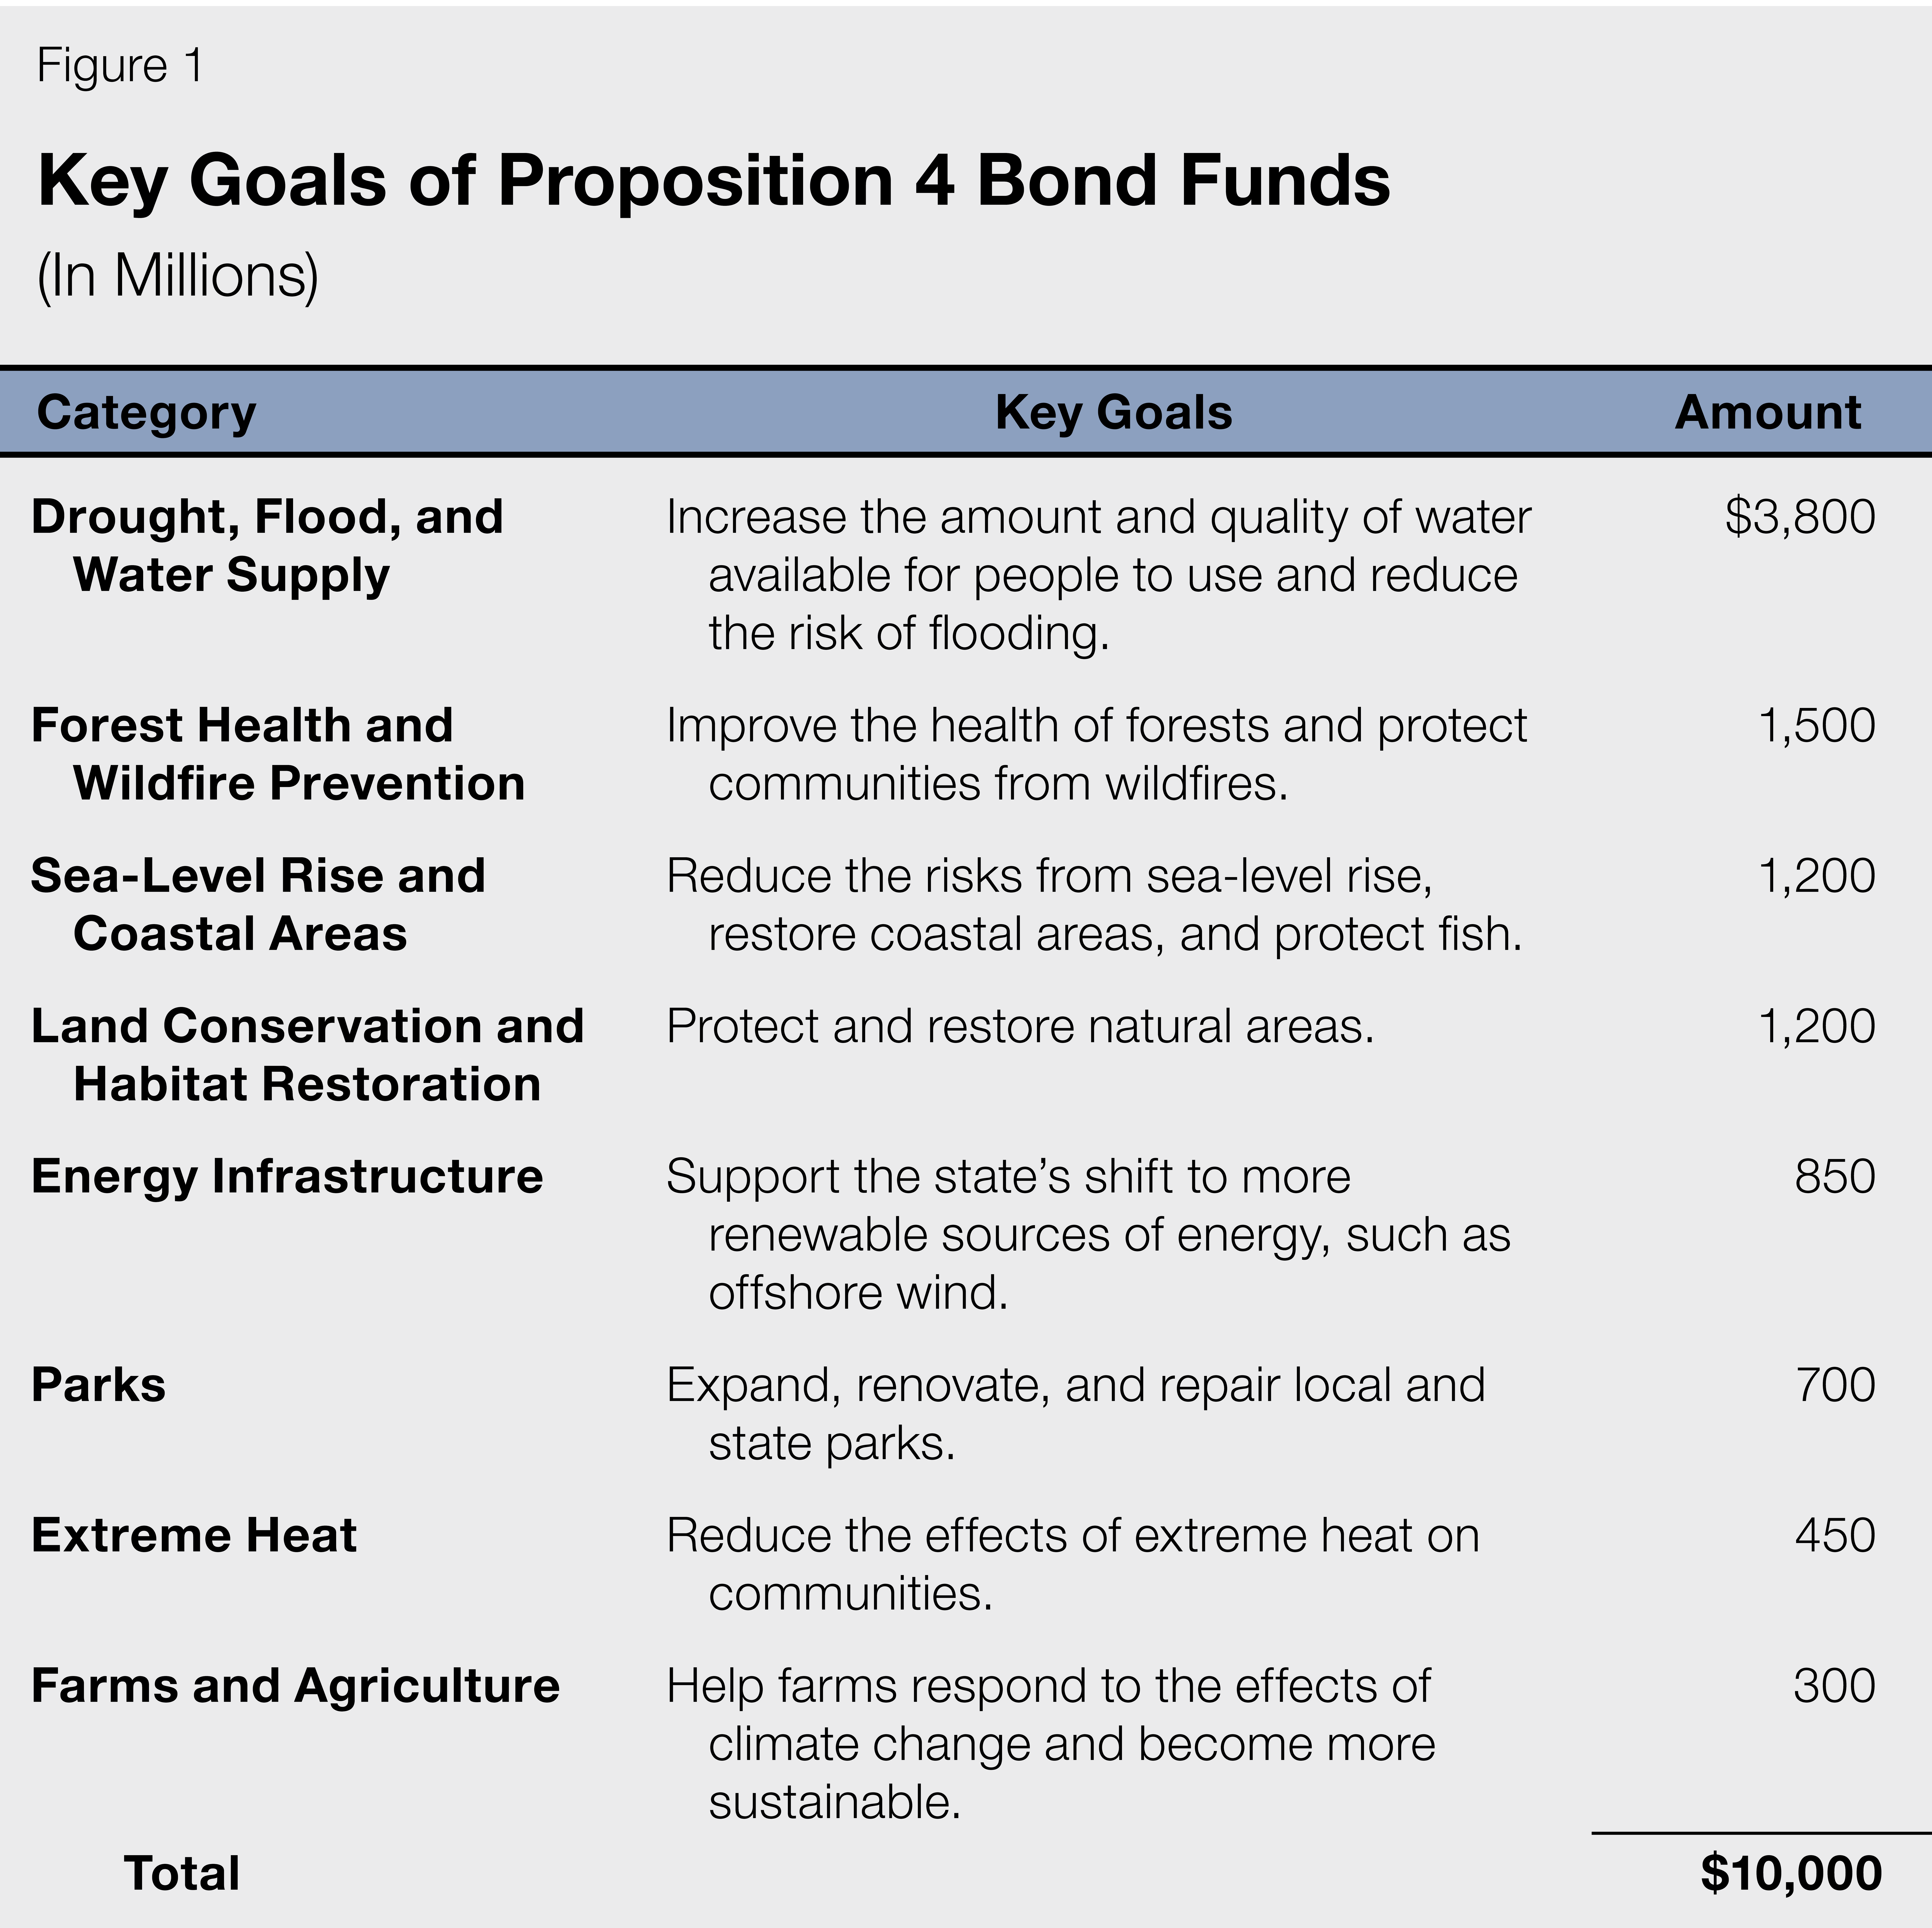 A table provides a summary of the funding provided in the bond, as well as some key goals of that funding. The bond would provide a total of $10 billion for eight categories, including:  1.	Drought, Flood, and Water Supply—$3.8 billion to increase the amount and quality of water available for people to use and reduce the risk of flooding. 2.	Forest Health and Wildfire Prevention—$1.5 billion to improve the health of forests and protect communities from wildfires. 3.	Sea-Level Rise and Coastal Areas—$1.2 billion to reduce the risks from sea-level rise, restore coastal areas, and protect fish. 4.	Land Conservation and Habitat Restoration—$1.2 billion to protect and restore natural areas. 5.	Energy Infrastructure—$850 million to support the state's shift to more renewable sources of energy, such as offshore wind. 6.	Parks—$700 million to expand, renovate, and repair local and state parks. 7.	Extreme Heat—$450 million to reduce the effects of extreme heat on communities. 8.	Farms and Agriculture—$300 million to help farms respond to the effects of climate change and become more sustainable.